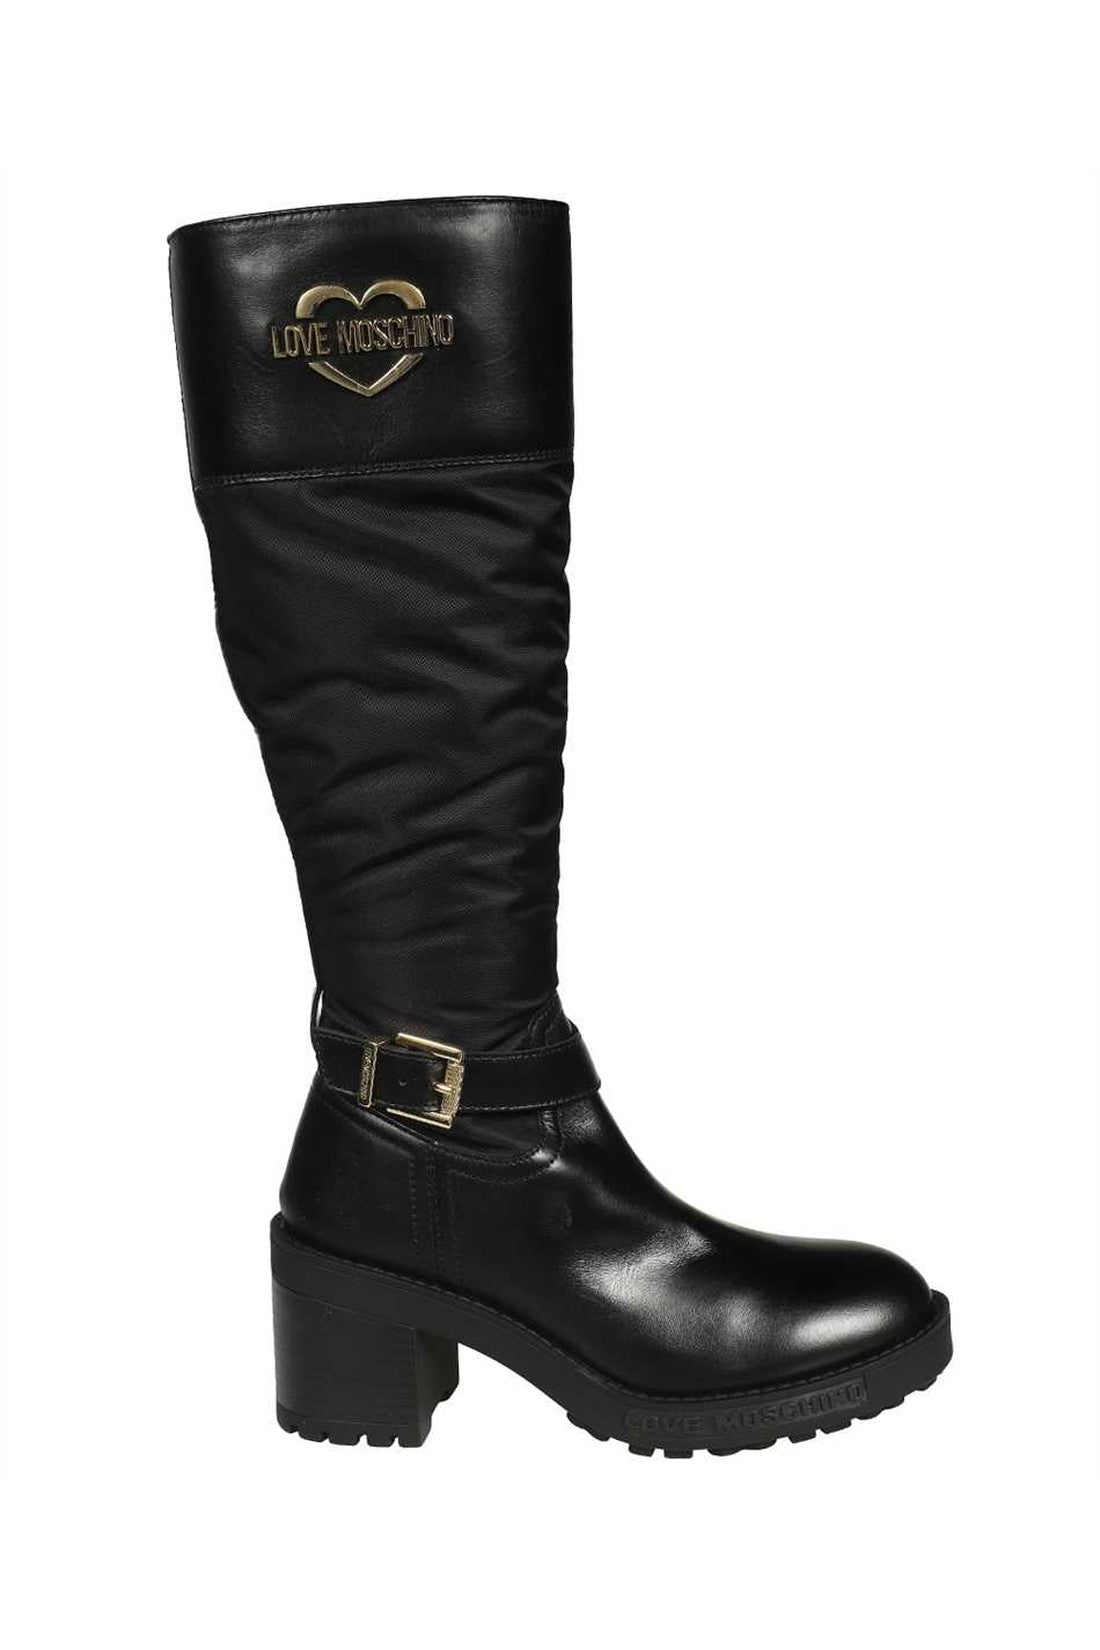 Knee-boots-Love Moschino-OUTLET-SALE-35-ARCHIVIST